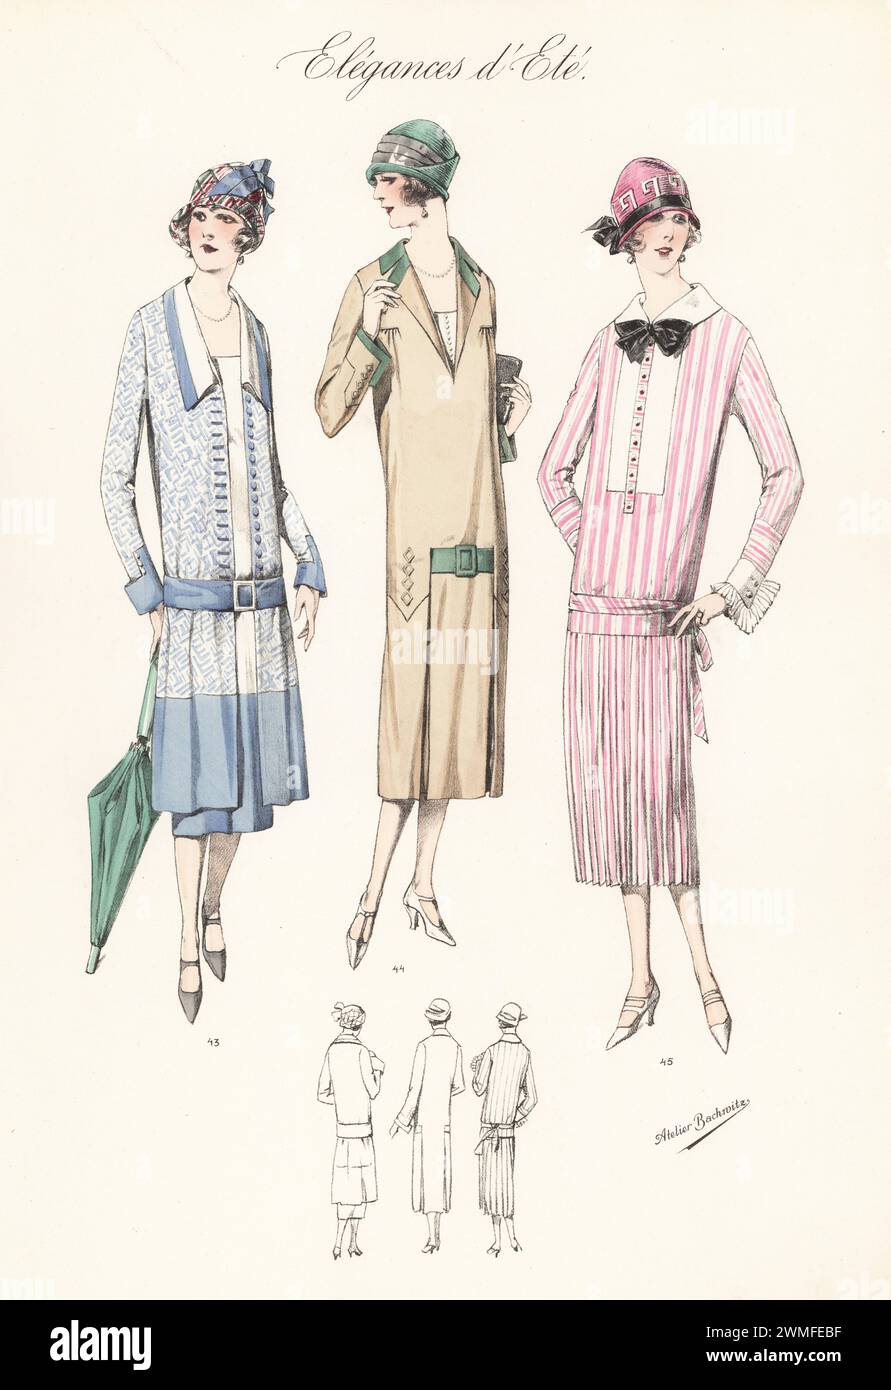 Flappers in cloche hats and summer frocks, 1925. Tunic robe of blue silk poplin 43, street dress of cotton with yoke shaped top and buckskin belt 44 and striped-pink natural silk frock with Byron collar and cuffs 45. Handcoloured lithograph by Atelier Bachwitz from Modell-Kleider fur den Hochsommer, Elegances d’Ete, Fashions for the Hot Season, Atelier Bachwitz AG, Vienna, 1925. Stock Photo